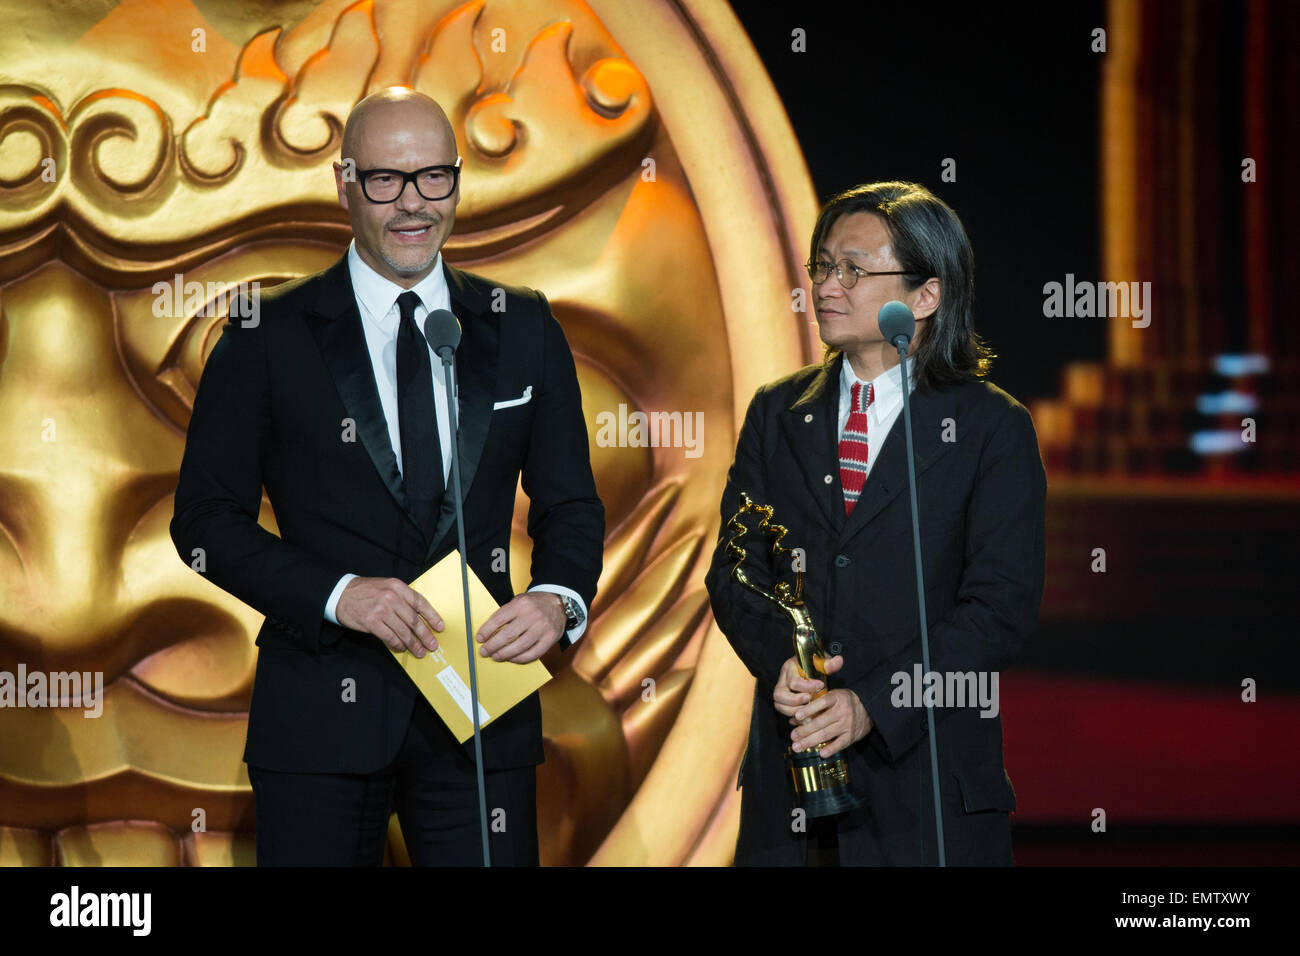 Beijing, China. 23rd Apr, 2015. Guests Peter Chan (R) and Fedor Bondarchuk attend the awarding ceremony of the Tiantan Award of the fifth Beijing International Film Festival (BJIFF) in Beijing, capital of China, April 23, 2015. © Chen Jianli/Xinhua/Alamy Live News Stock Photo